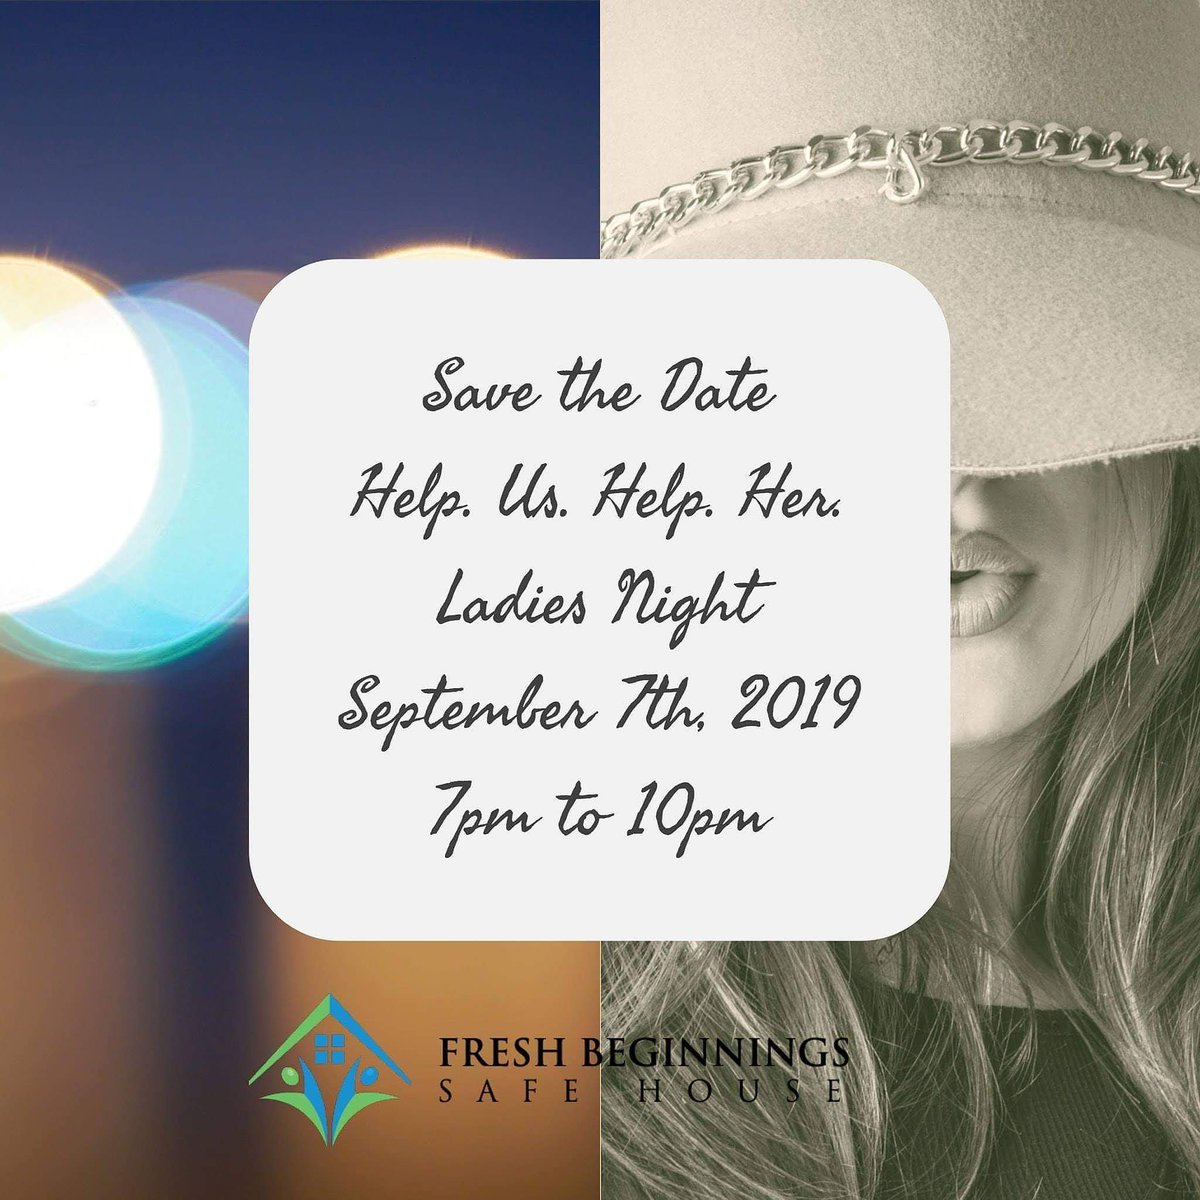 Save the date ladies! You don't want to miss! #helpushelpher